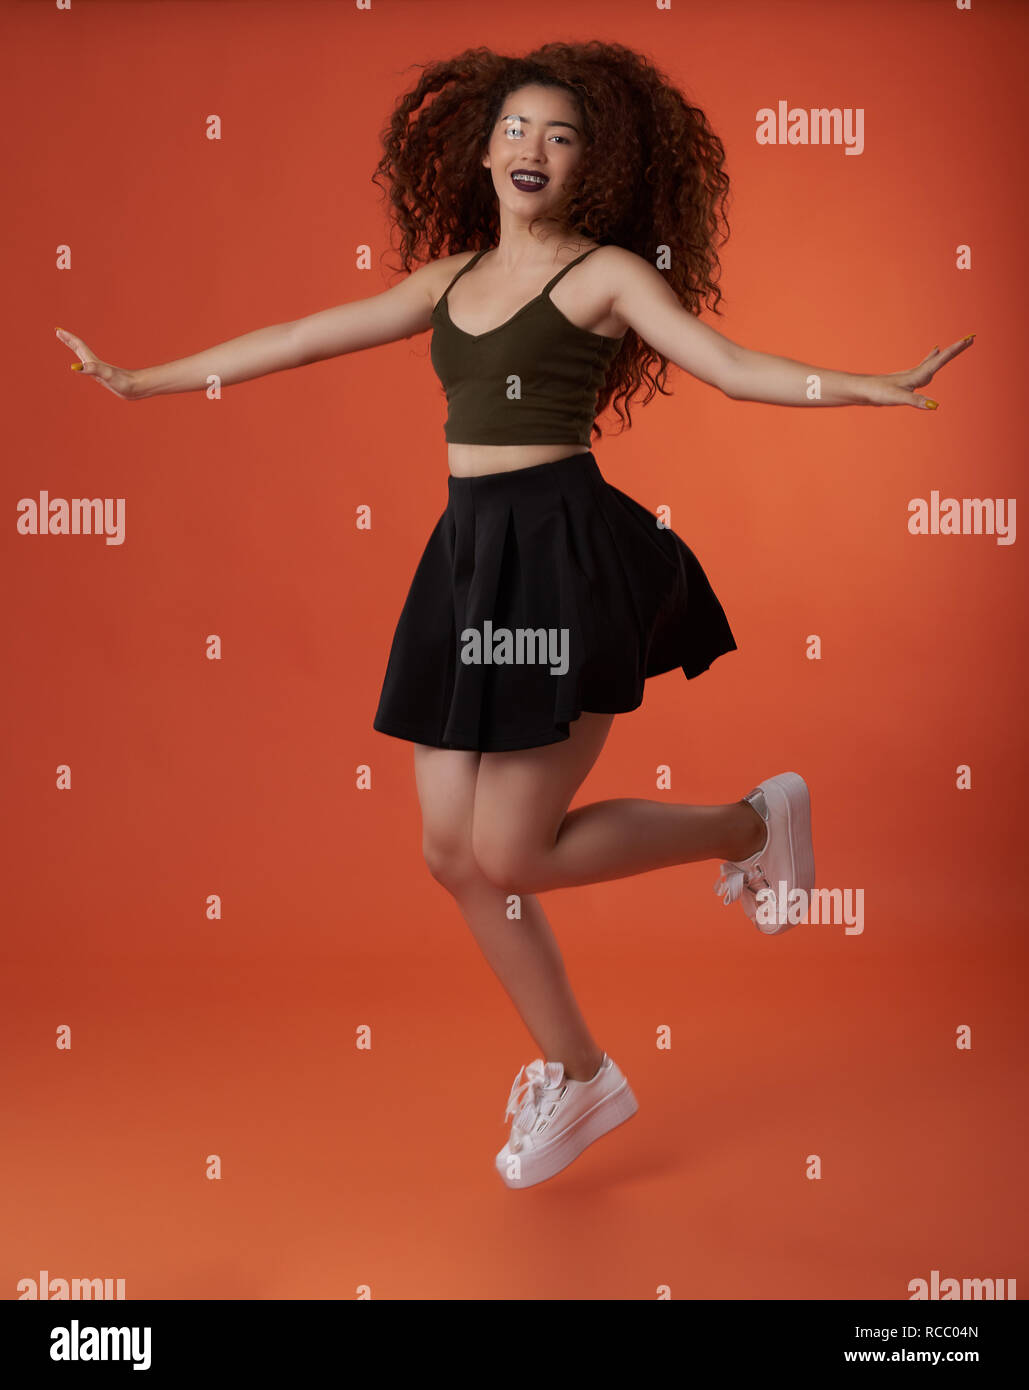 Young woman happy jump. Happy smiling girl in air Stock Photo